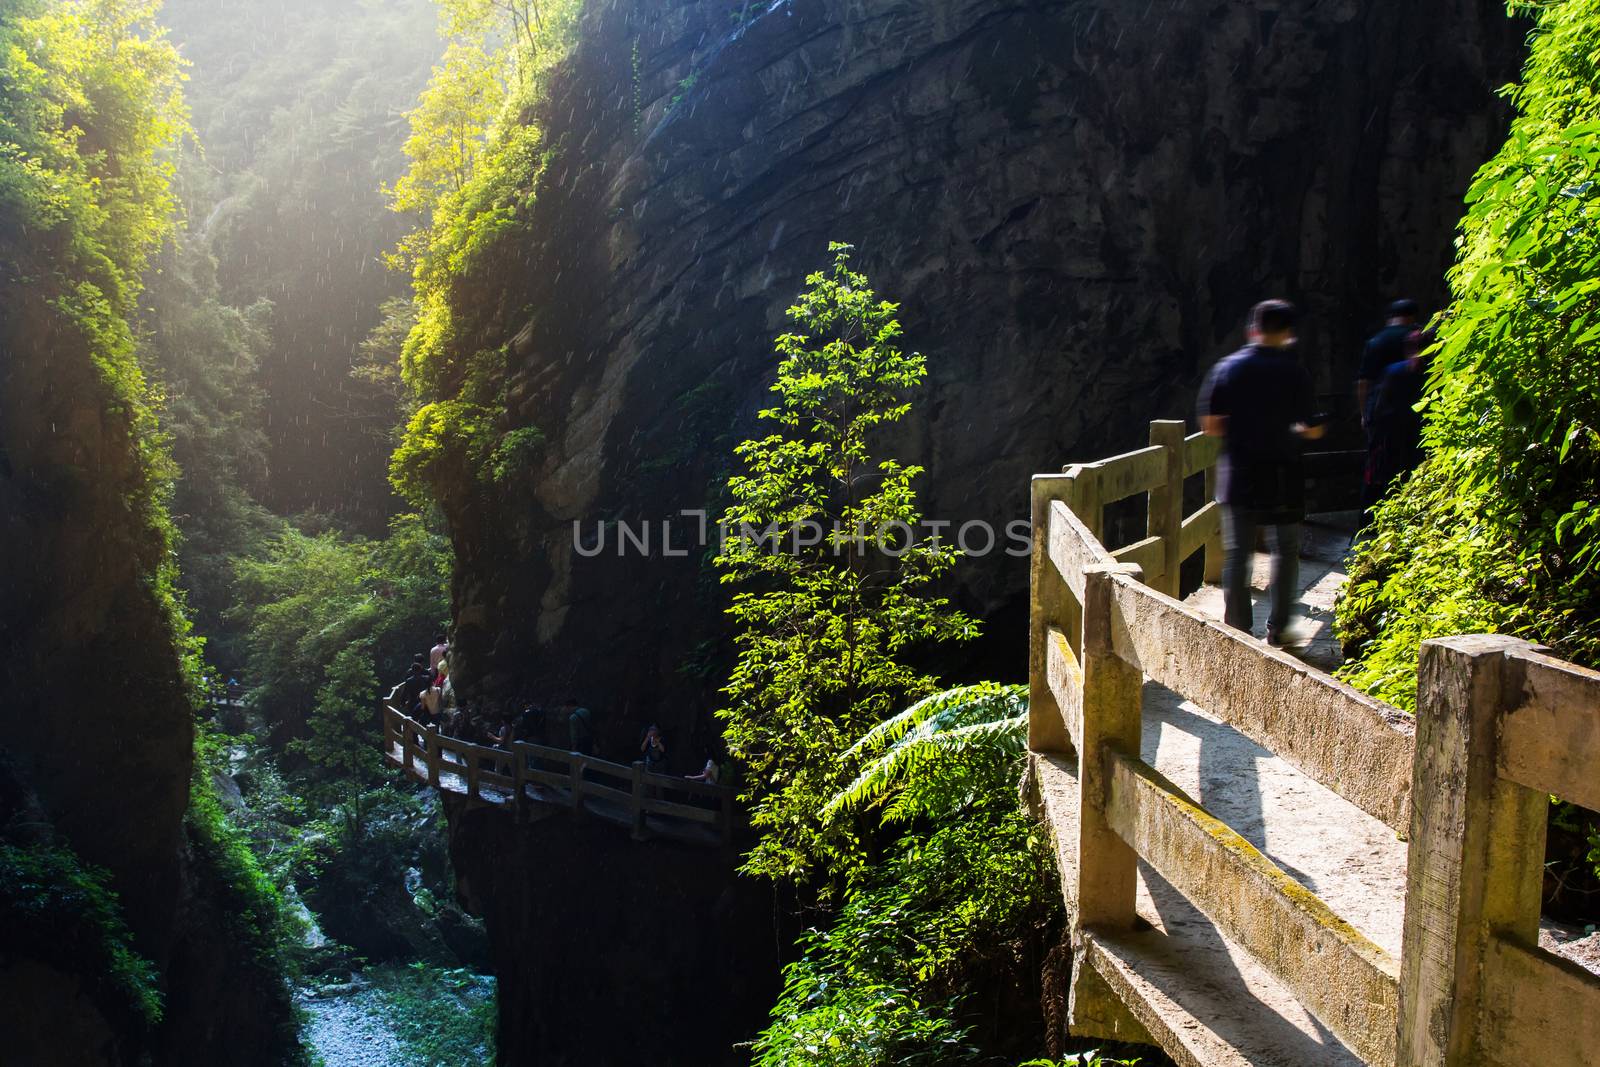 Longshuixia Fissure Gorge by happystock